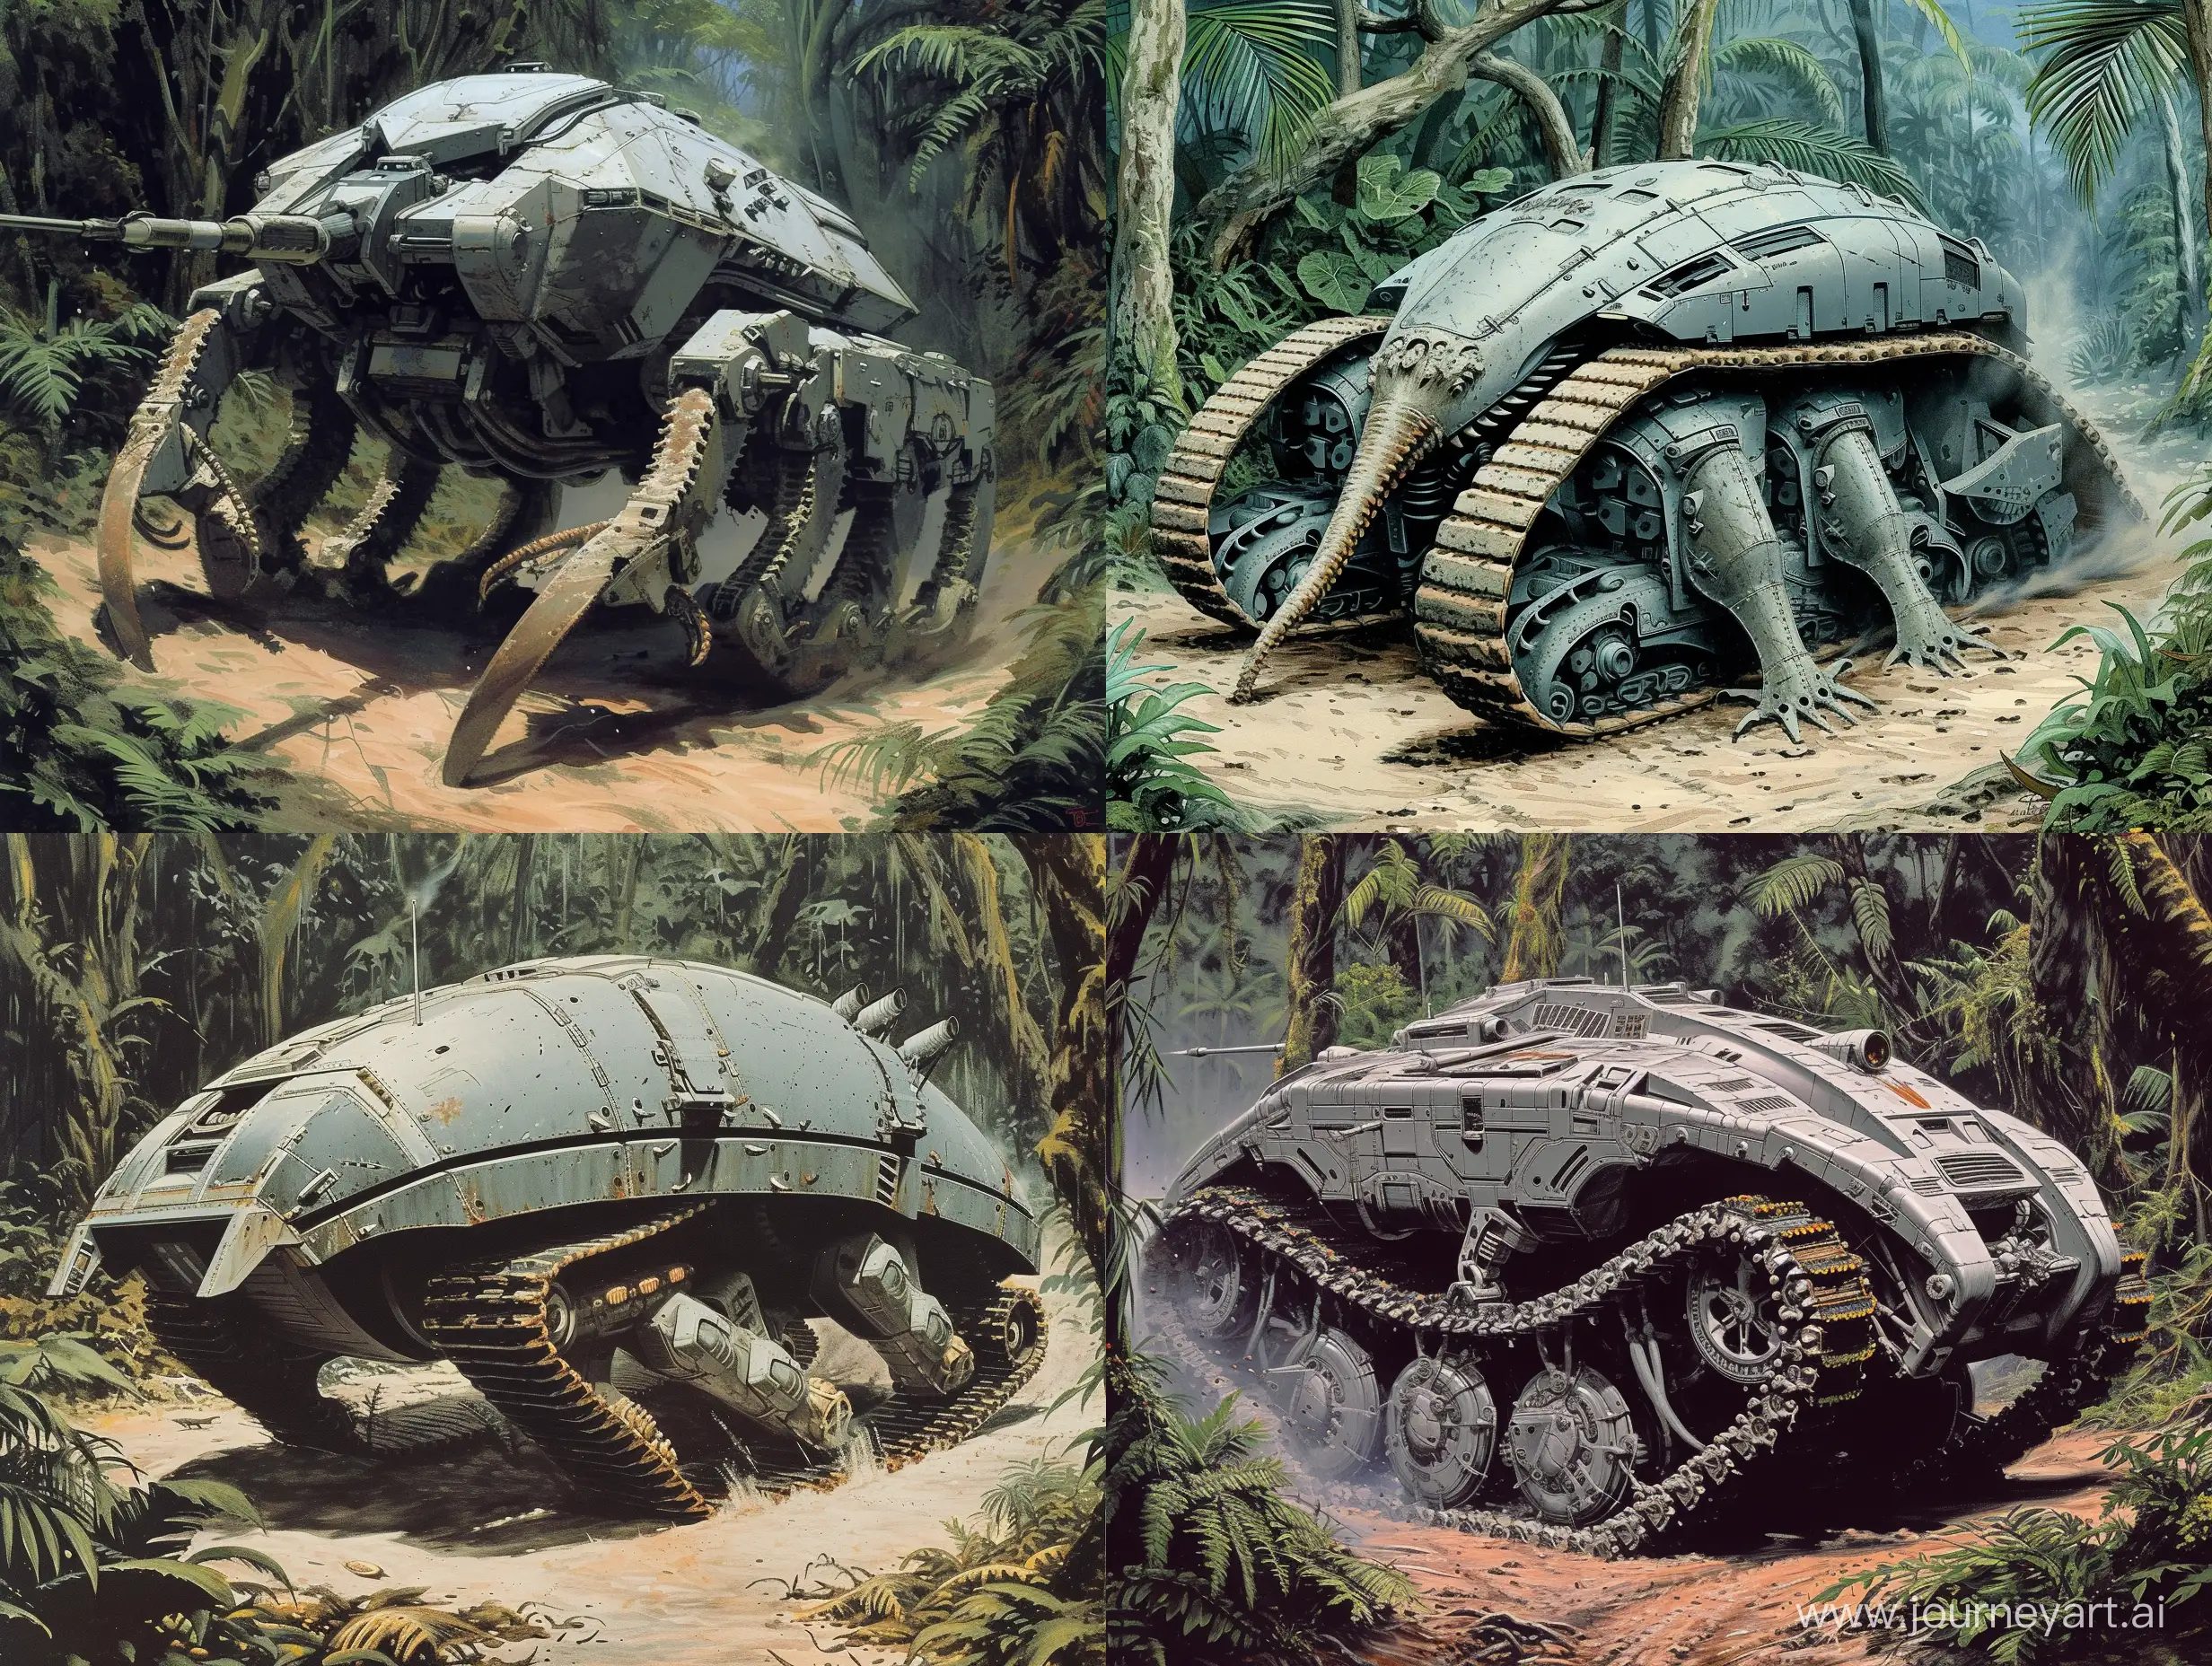 Concept art of a giant armored gray tank with tracks slightly resembling a trilobite fighting in a jungle painted by Ralph McQuarrie. the tank has treads instead of legs. in Retro Science Fiction Art style. in color.
